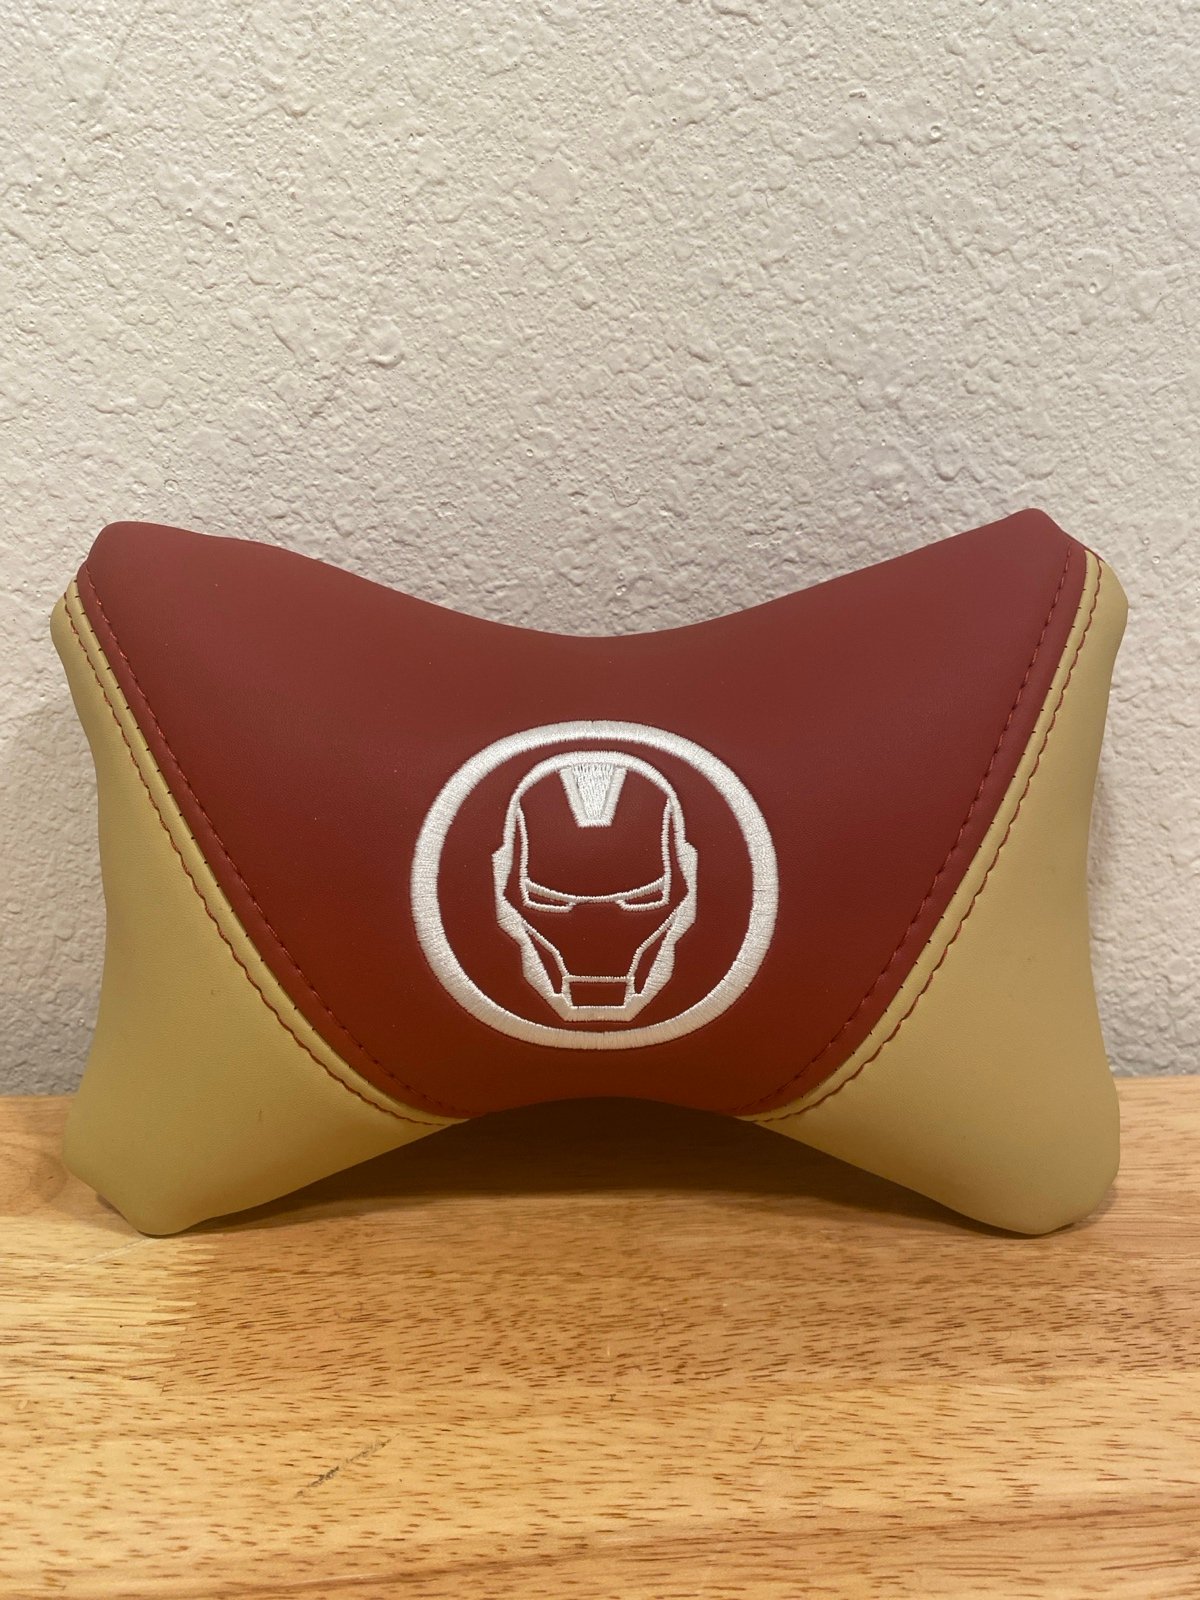 Iron Man Limited Edition Neck Cushion Official Marvel auto accessory L89snScOJ